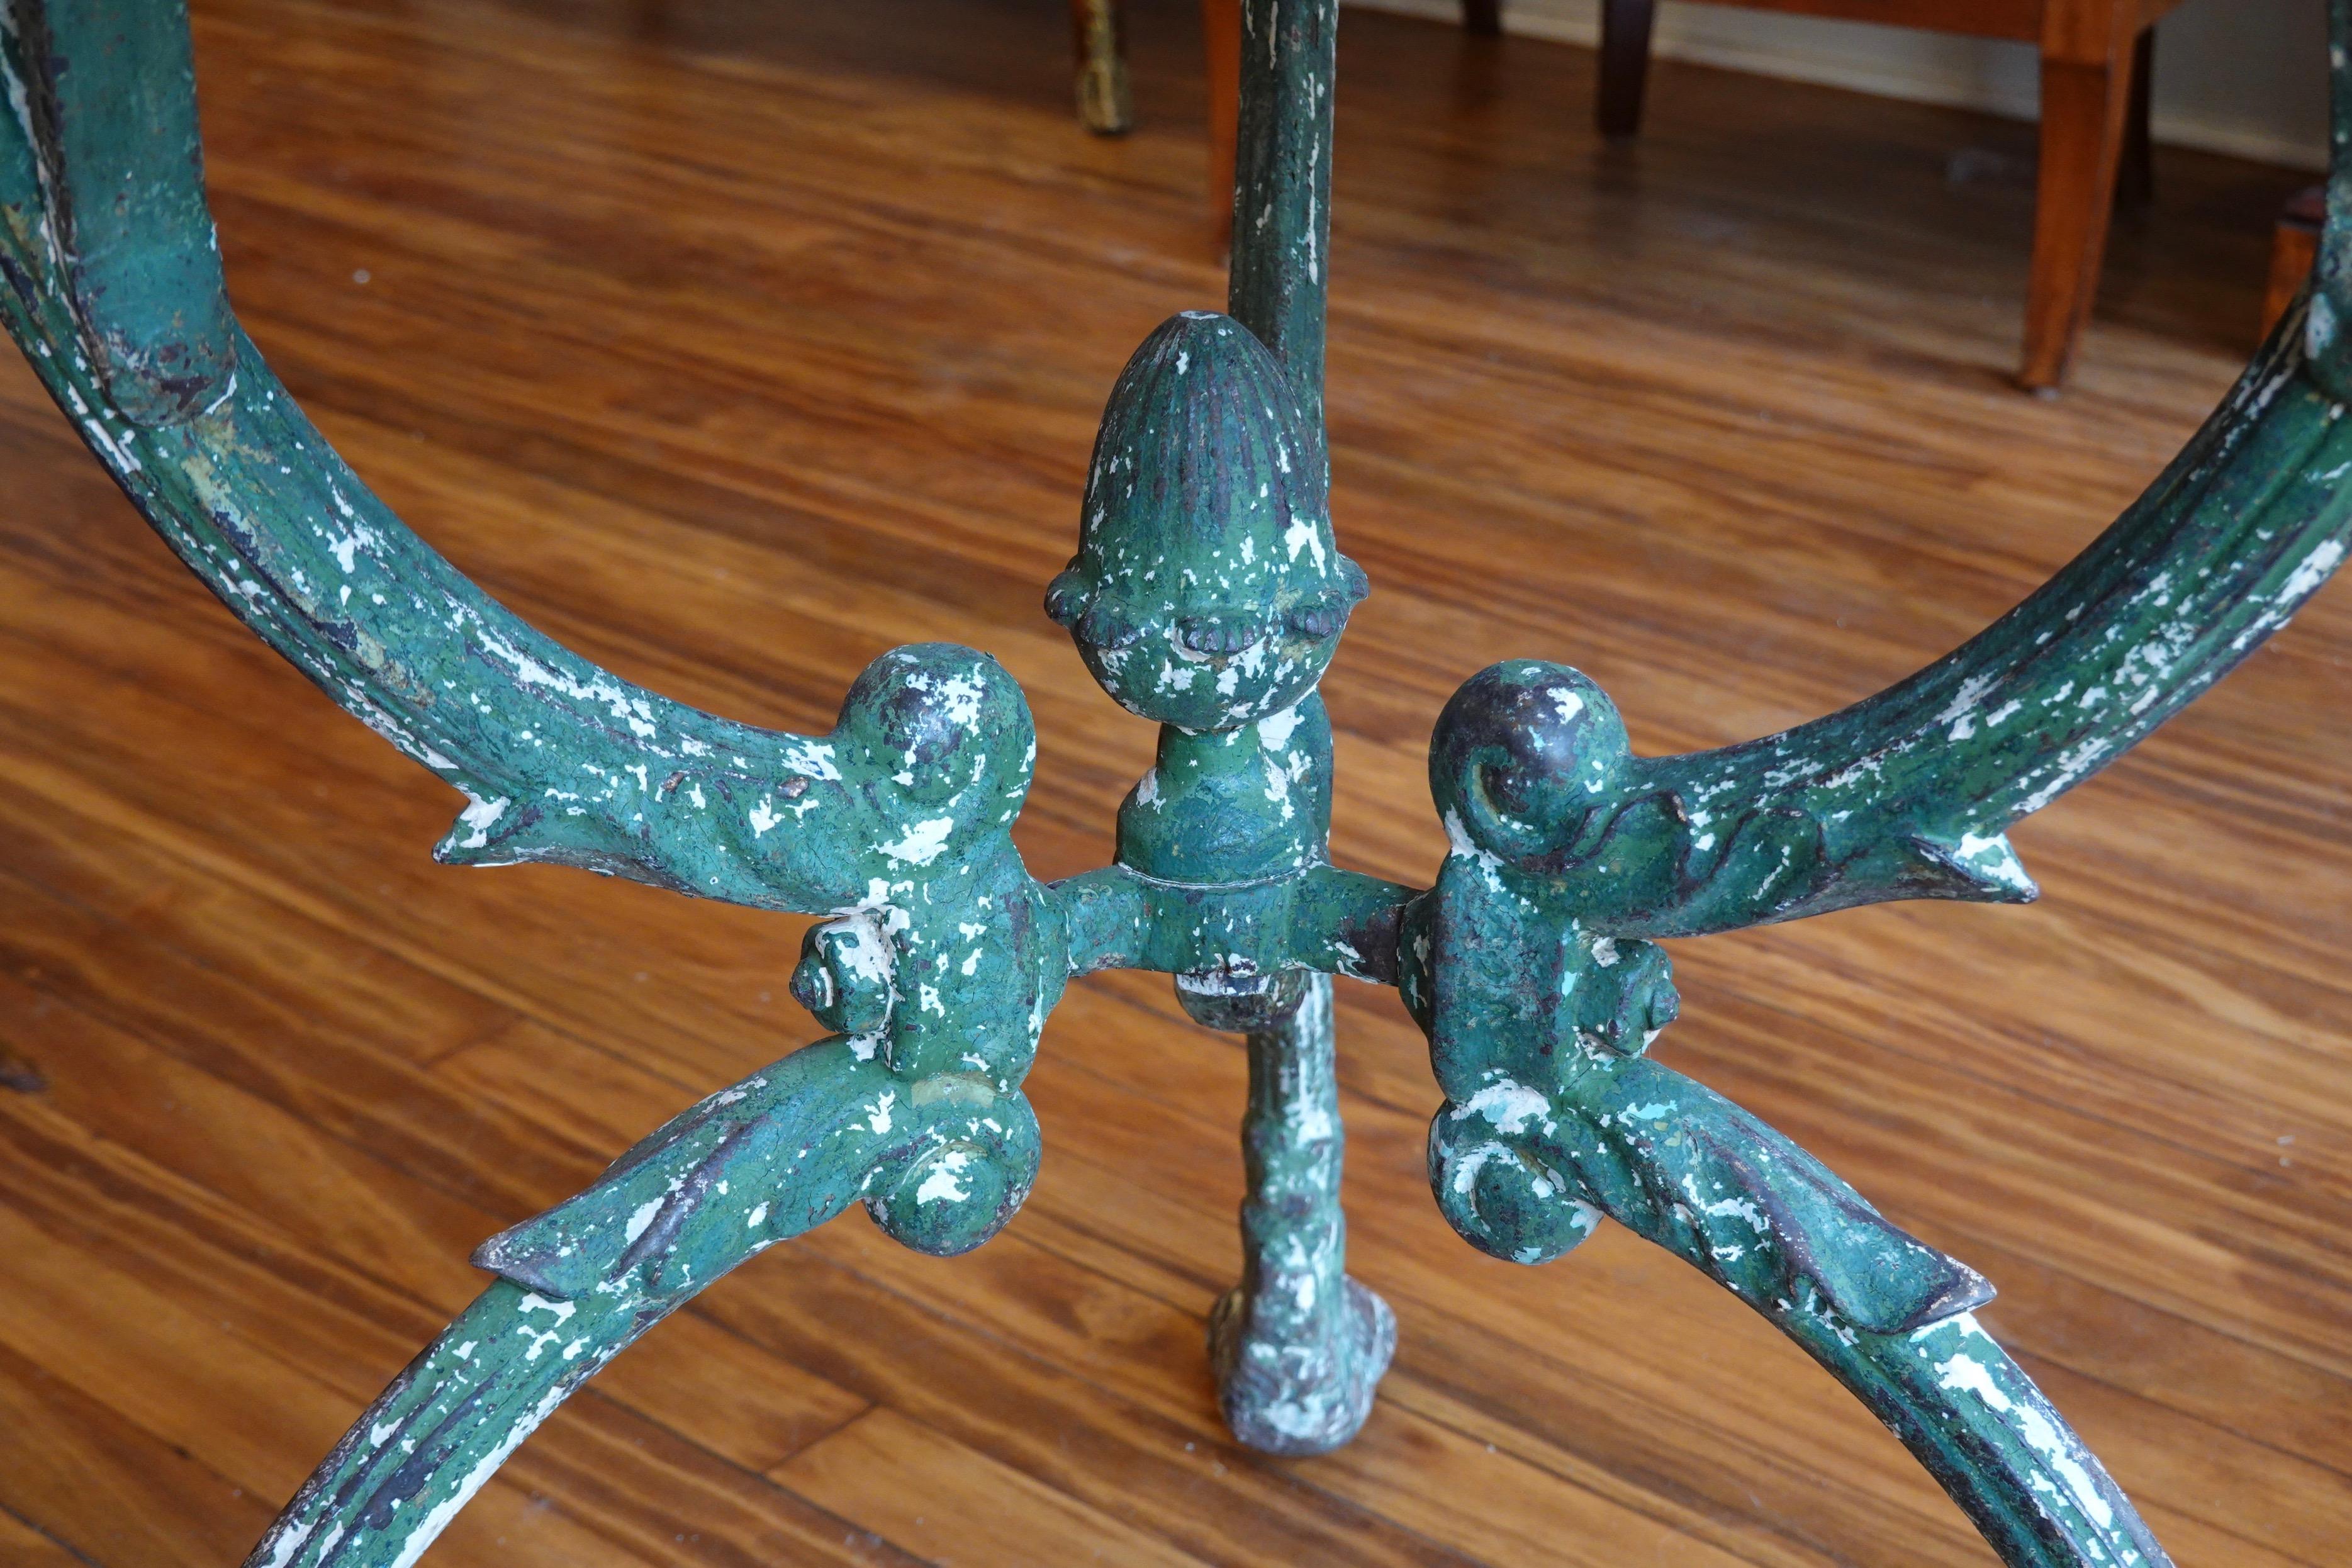 Neoclassical French Cast Iron Garden Table with Marble Top and Decorative Tripod Base